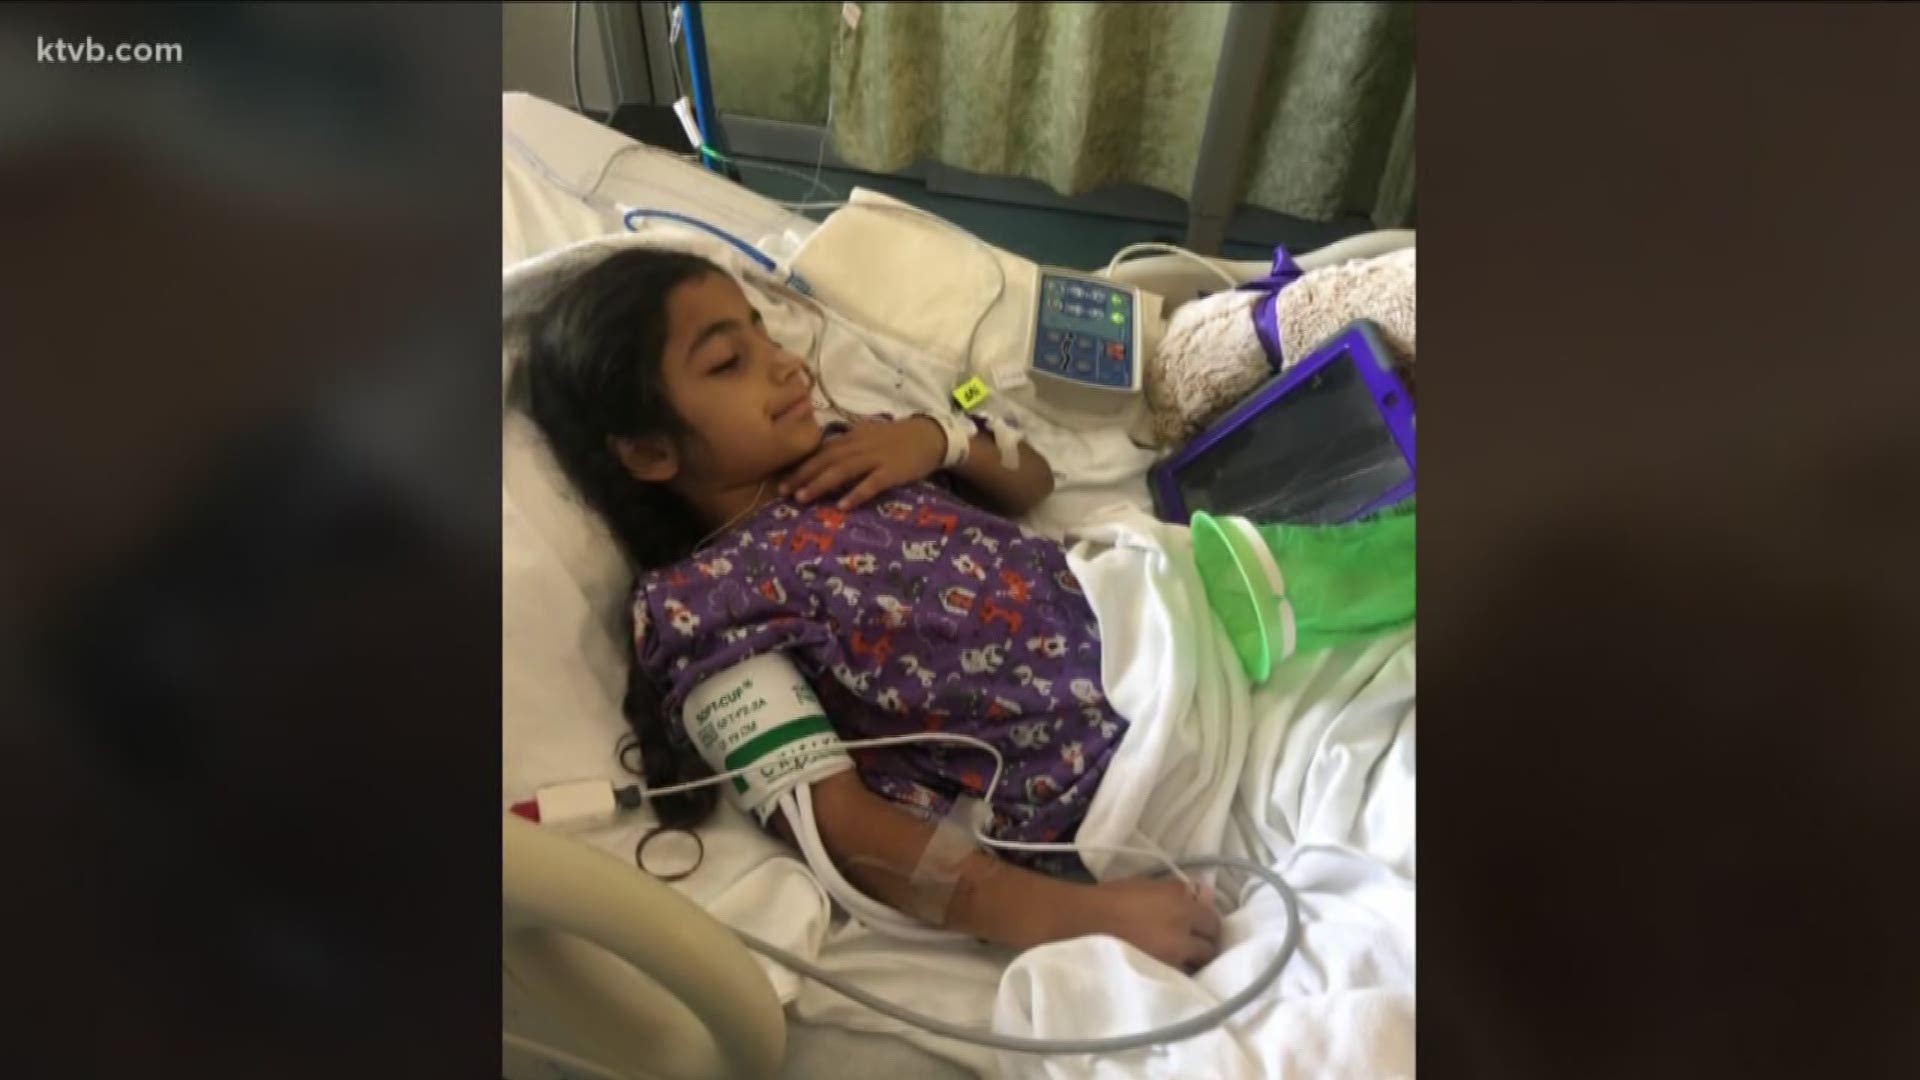 KTVB went to went to St. Luke's Children's Hospital to speak with some loved ones visiting 6-year-old Teba Mutlak - one of six children hurt in the mass stabbing in Boise.